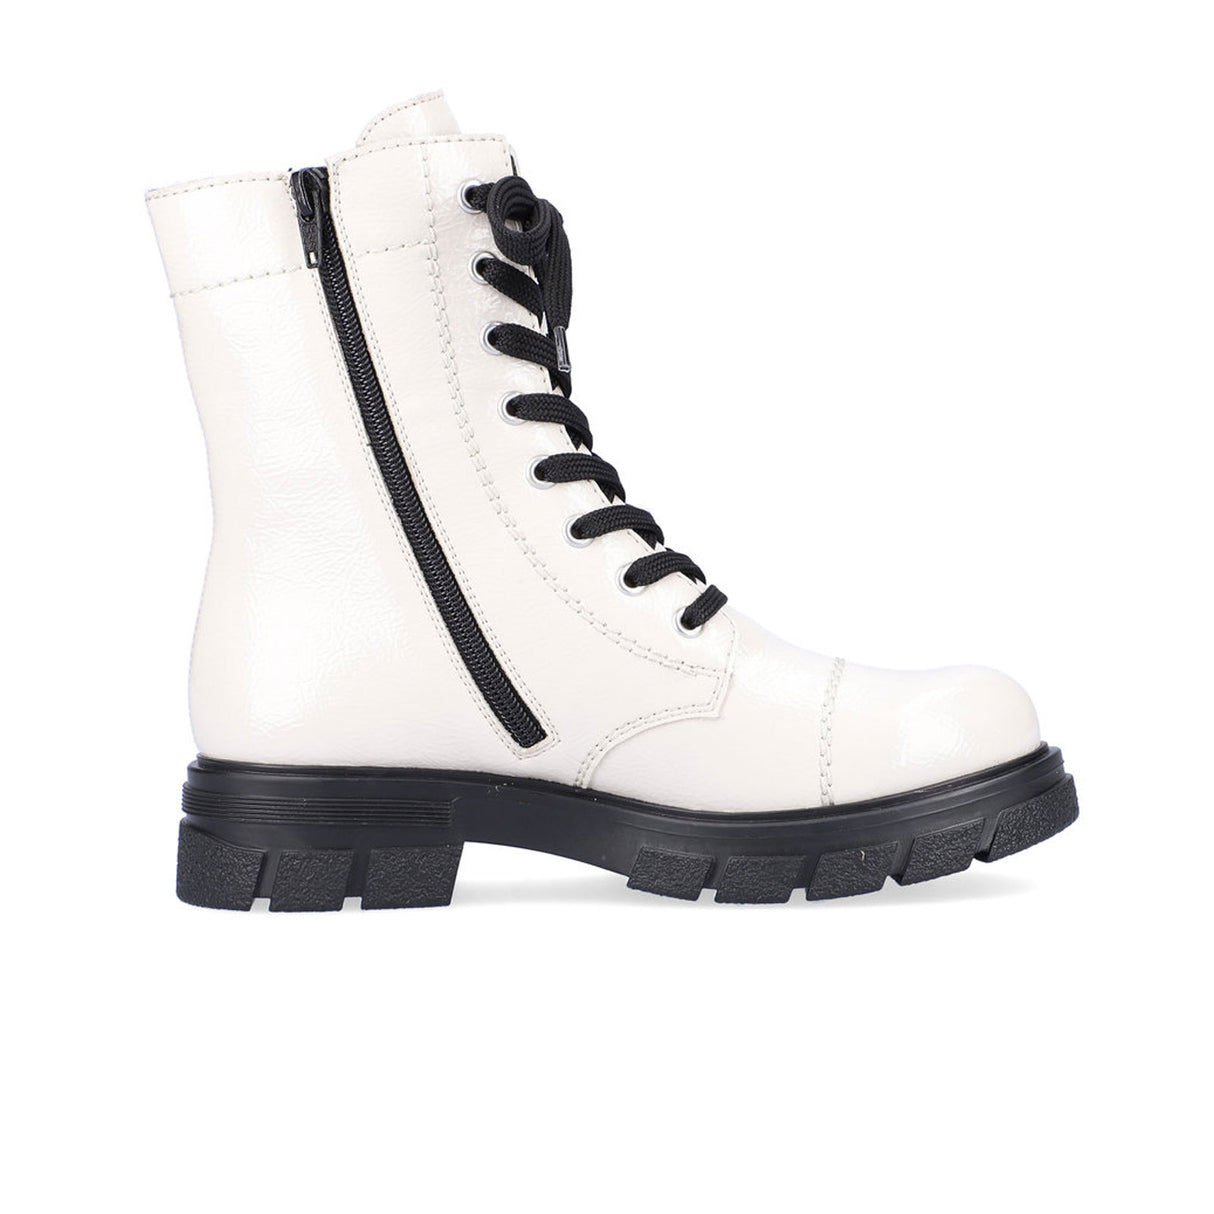 Rieker Tora Z9122-80 Mid Boot (Women) - Offwhite Boots - Fashion - Mid Boot - The Heel Shoe Fitters